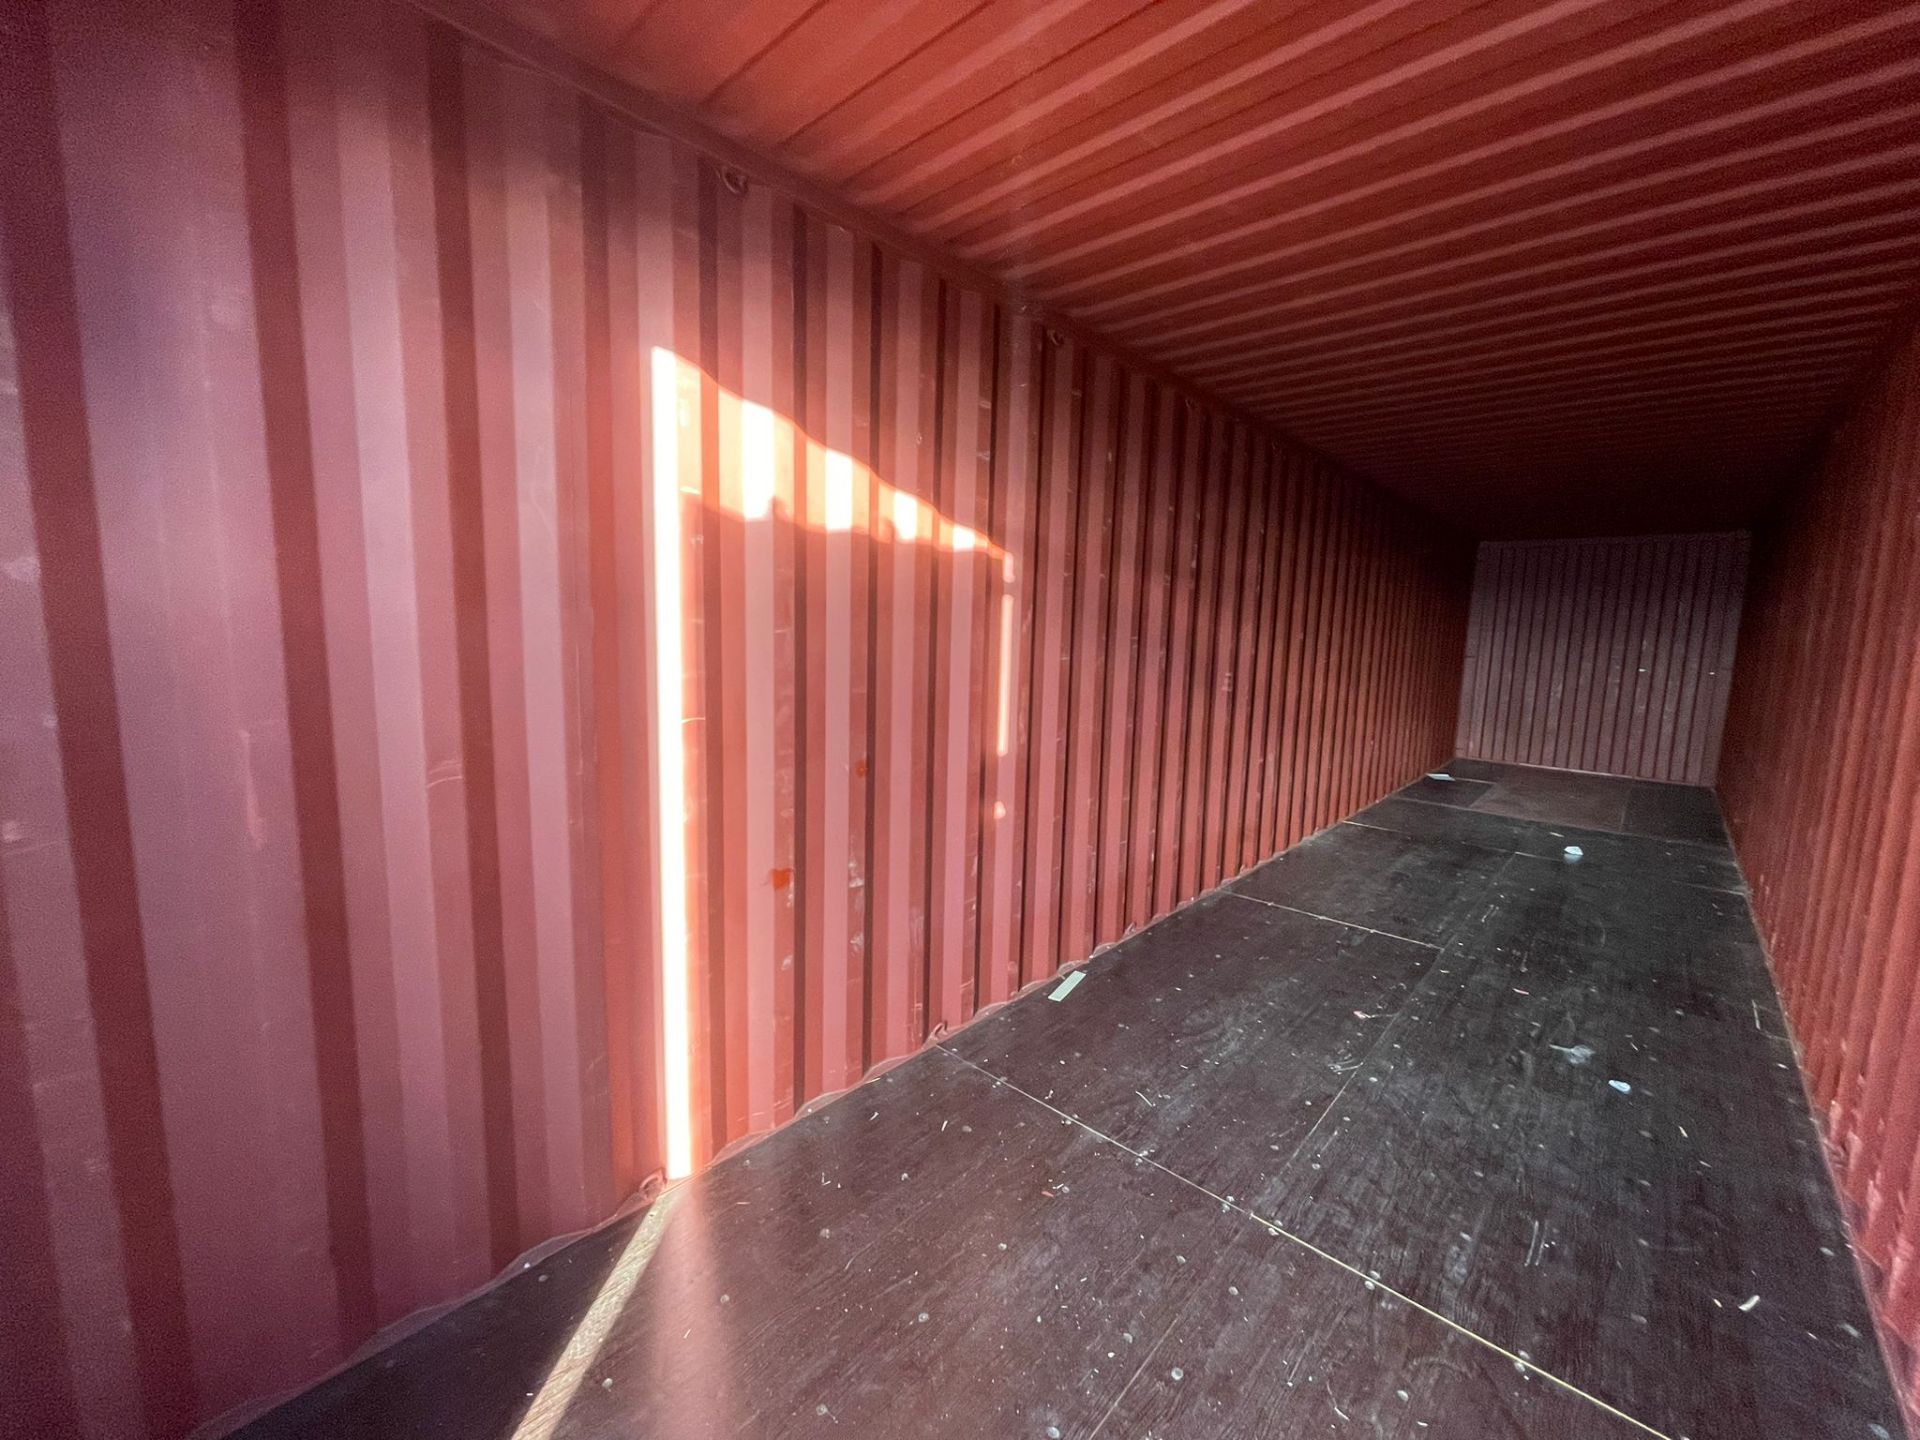 40ft HC Shipping Container - ref CICU9560810 - Image 3 of 6